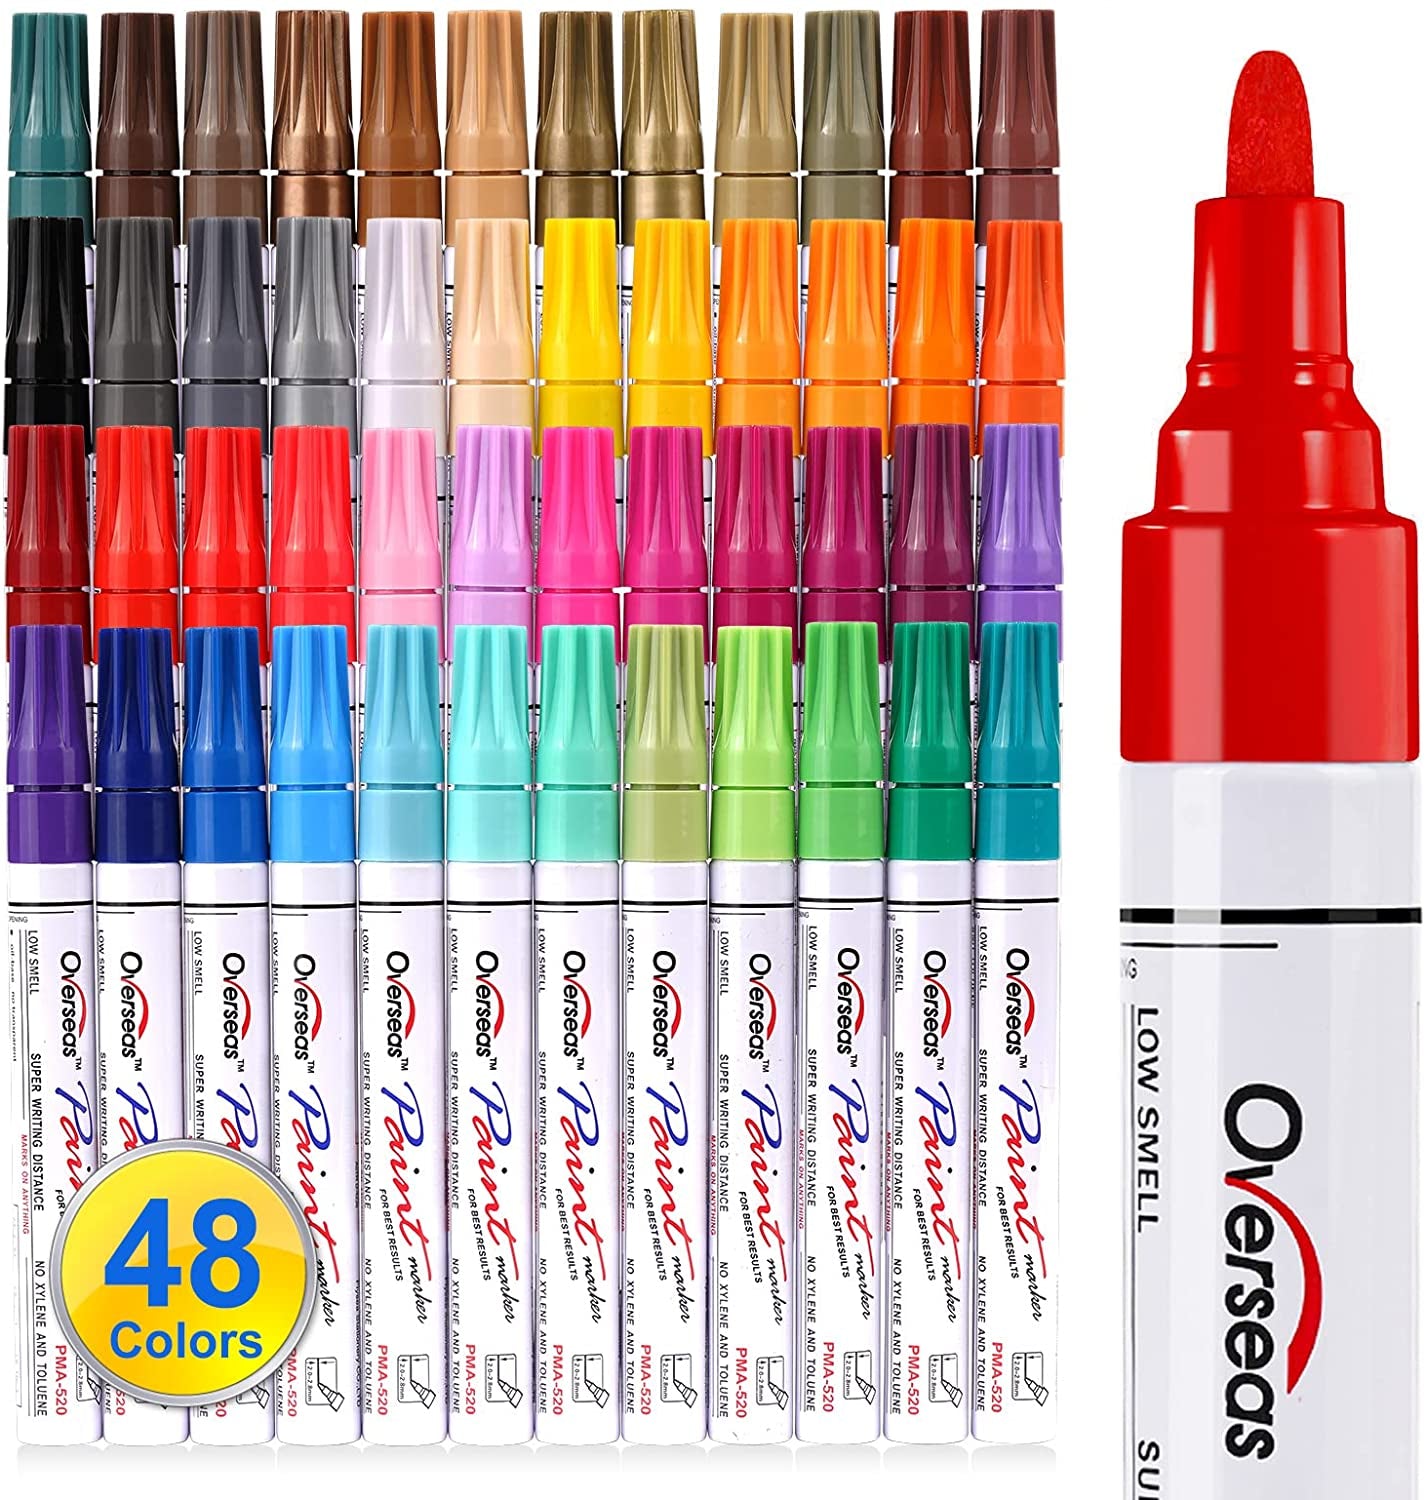 Paint Marker Pens - 5 Colors Permanent Oil Based Paint Markers Medium Tip  Quick Dry and Waterproof Assorted Color Marker for Metal Wood Fabric  Plastic Rock Painting Stone Mugs Canvas Glass